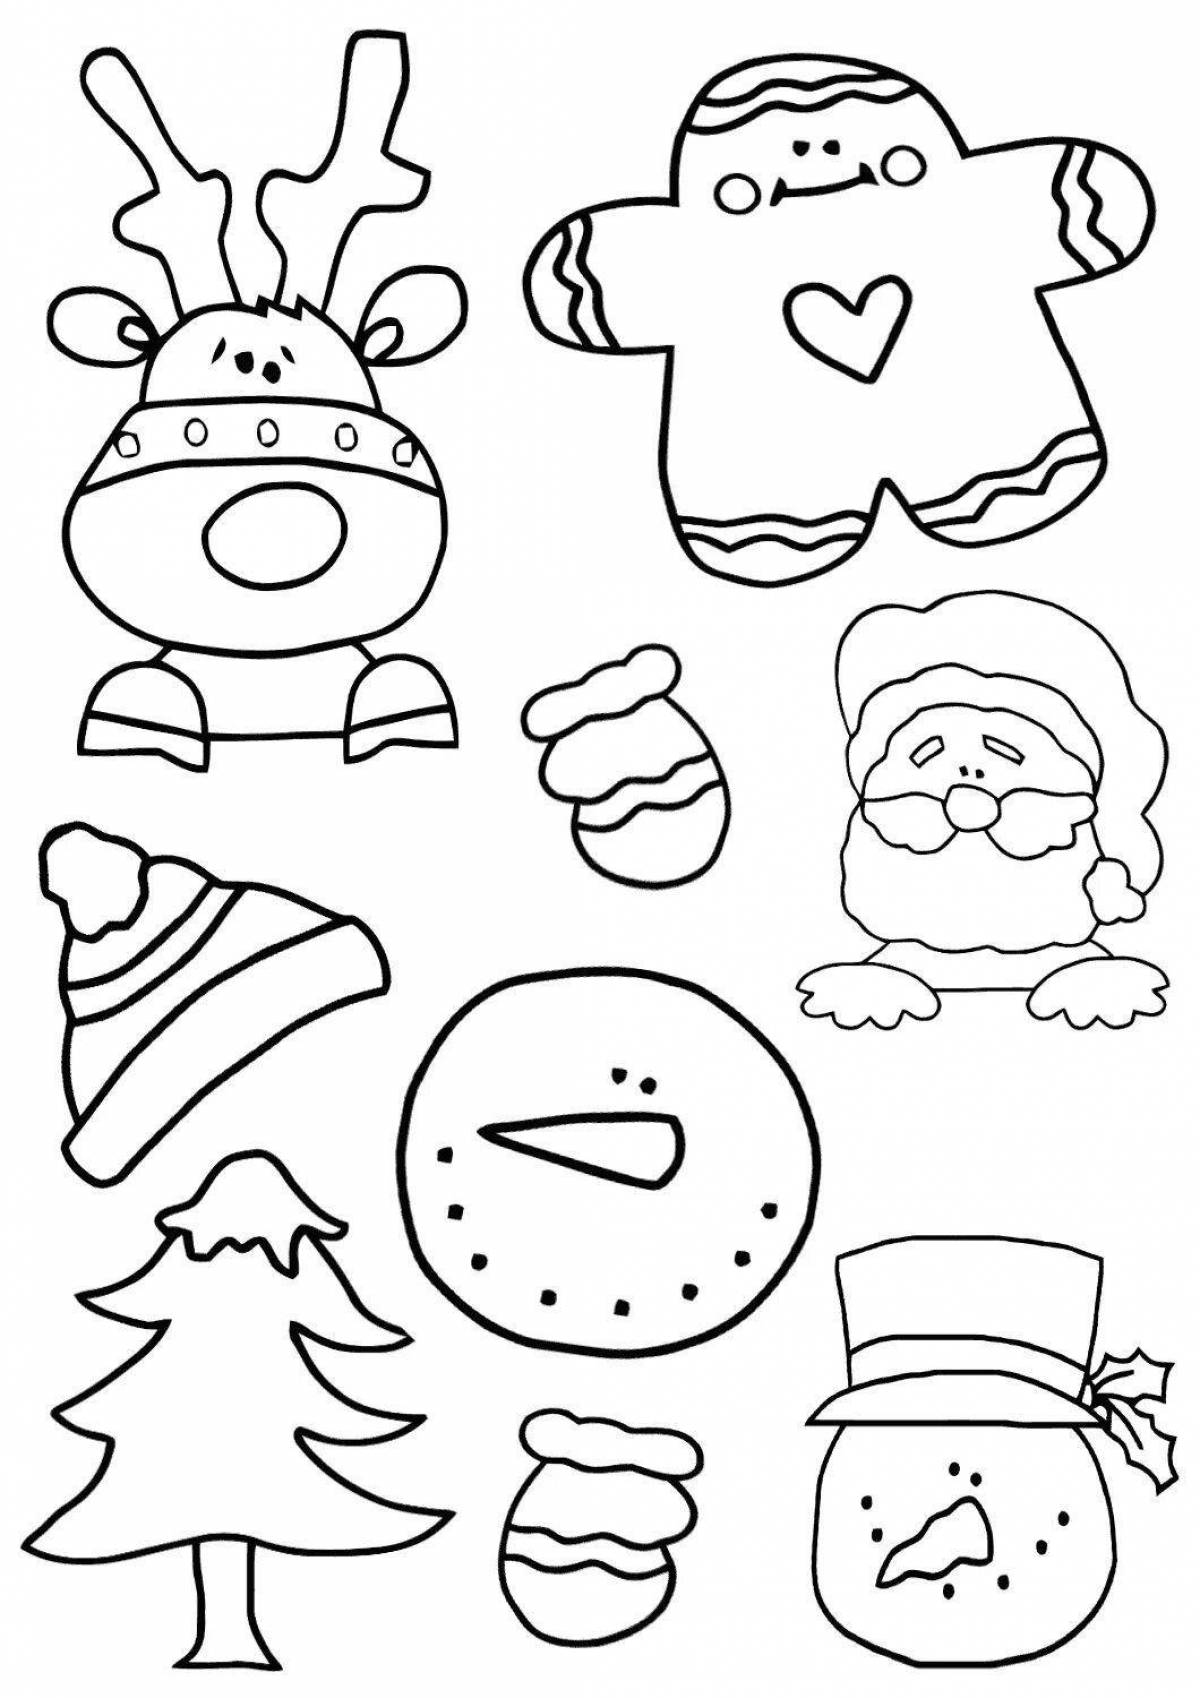 Fun coloring pages for stickers